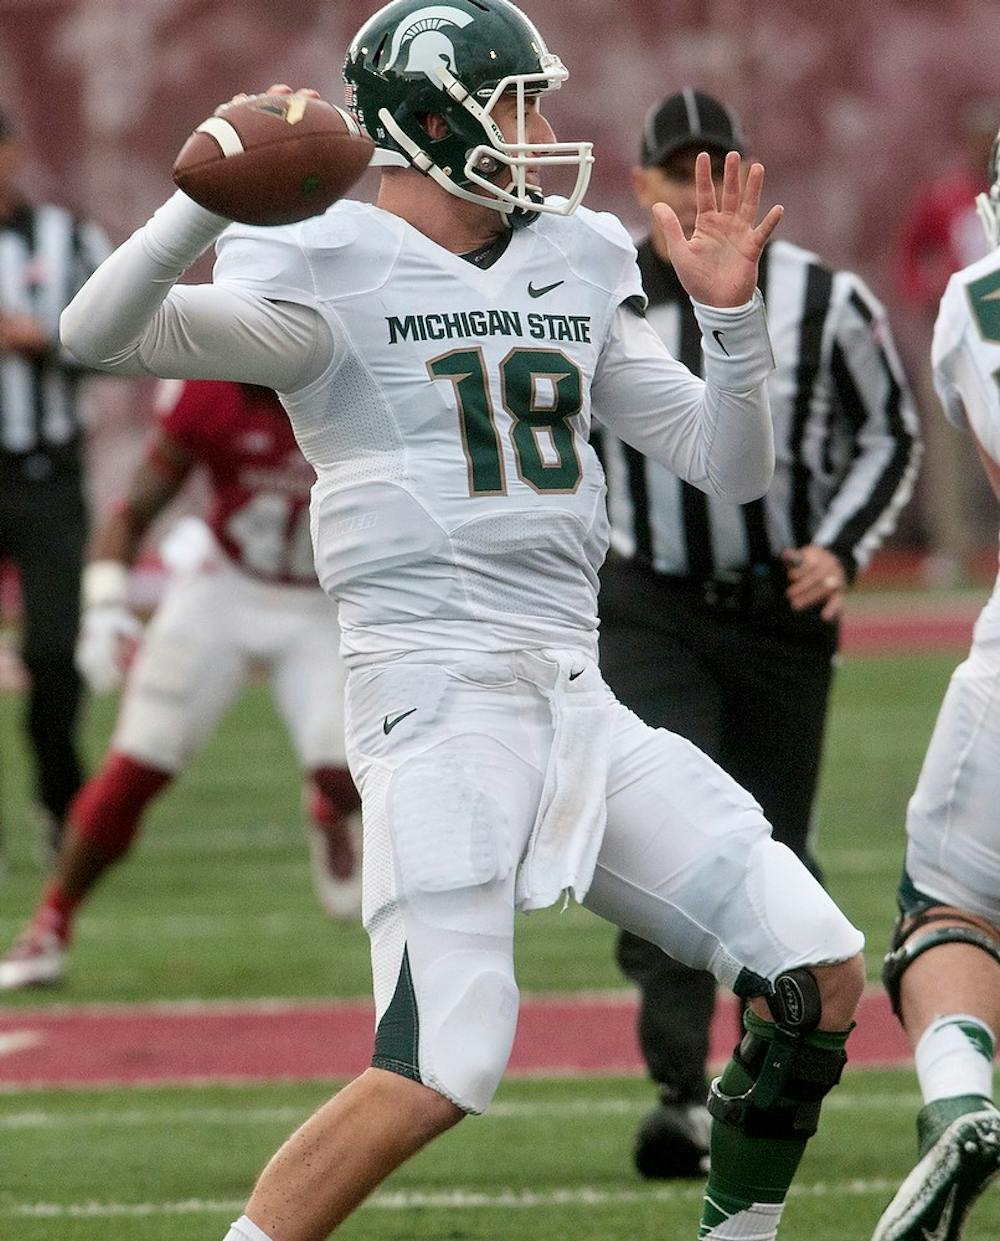 <p>Junior quarterback Connor Cook attempts to make a pass during the game against Indiana on Oct. 18, 2014, at Memorial Stadium in Bloomington, Ind. The Spartans defeated the Hoosiers, 56-17. Raymond Williams/The State News</p>